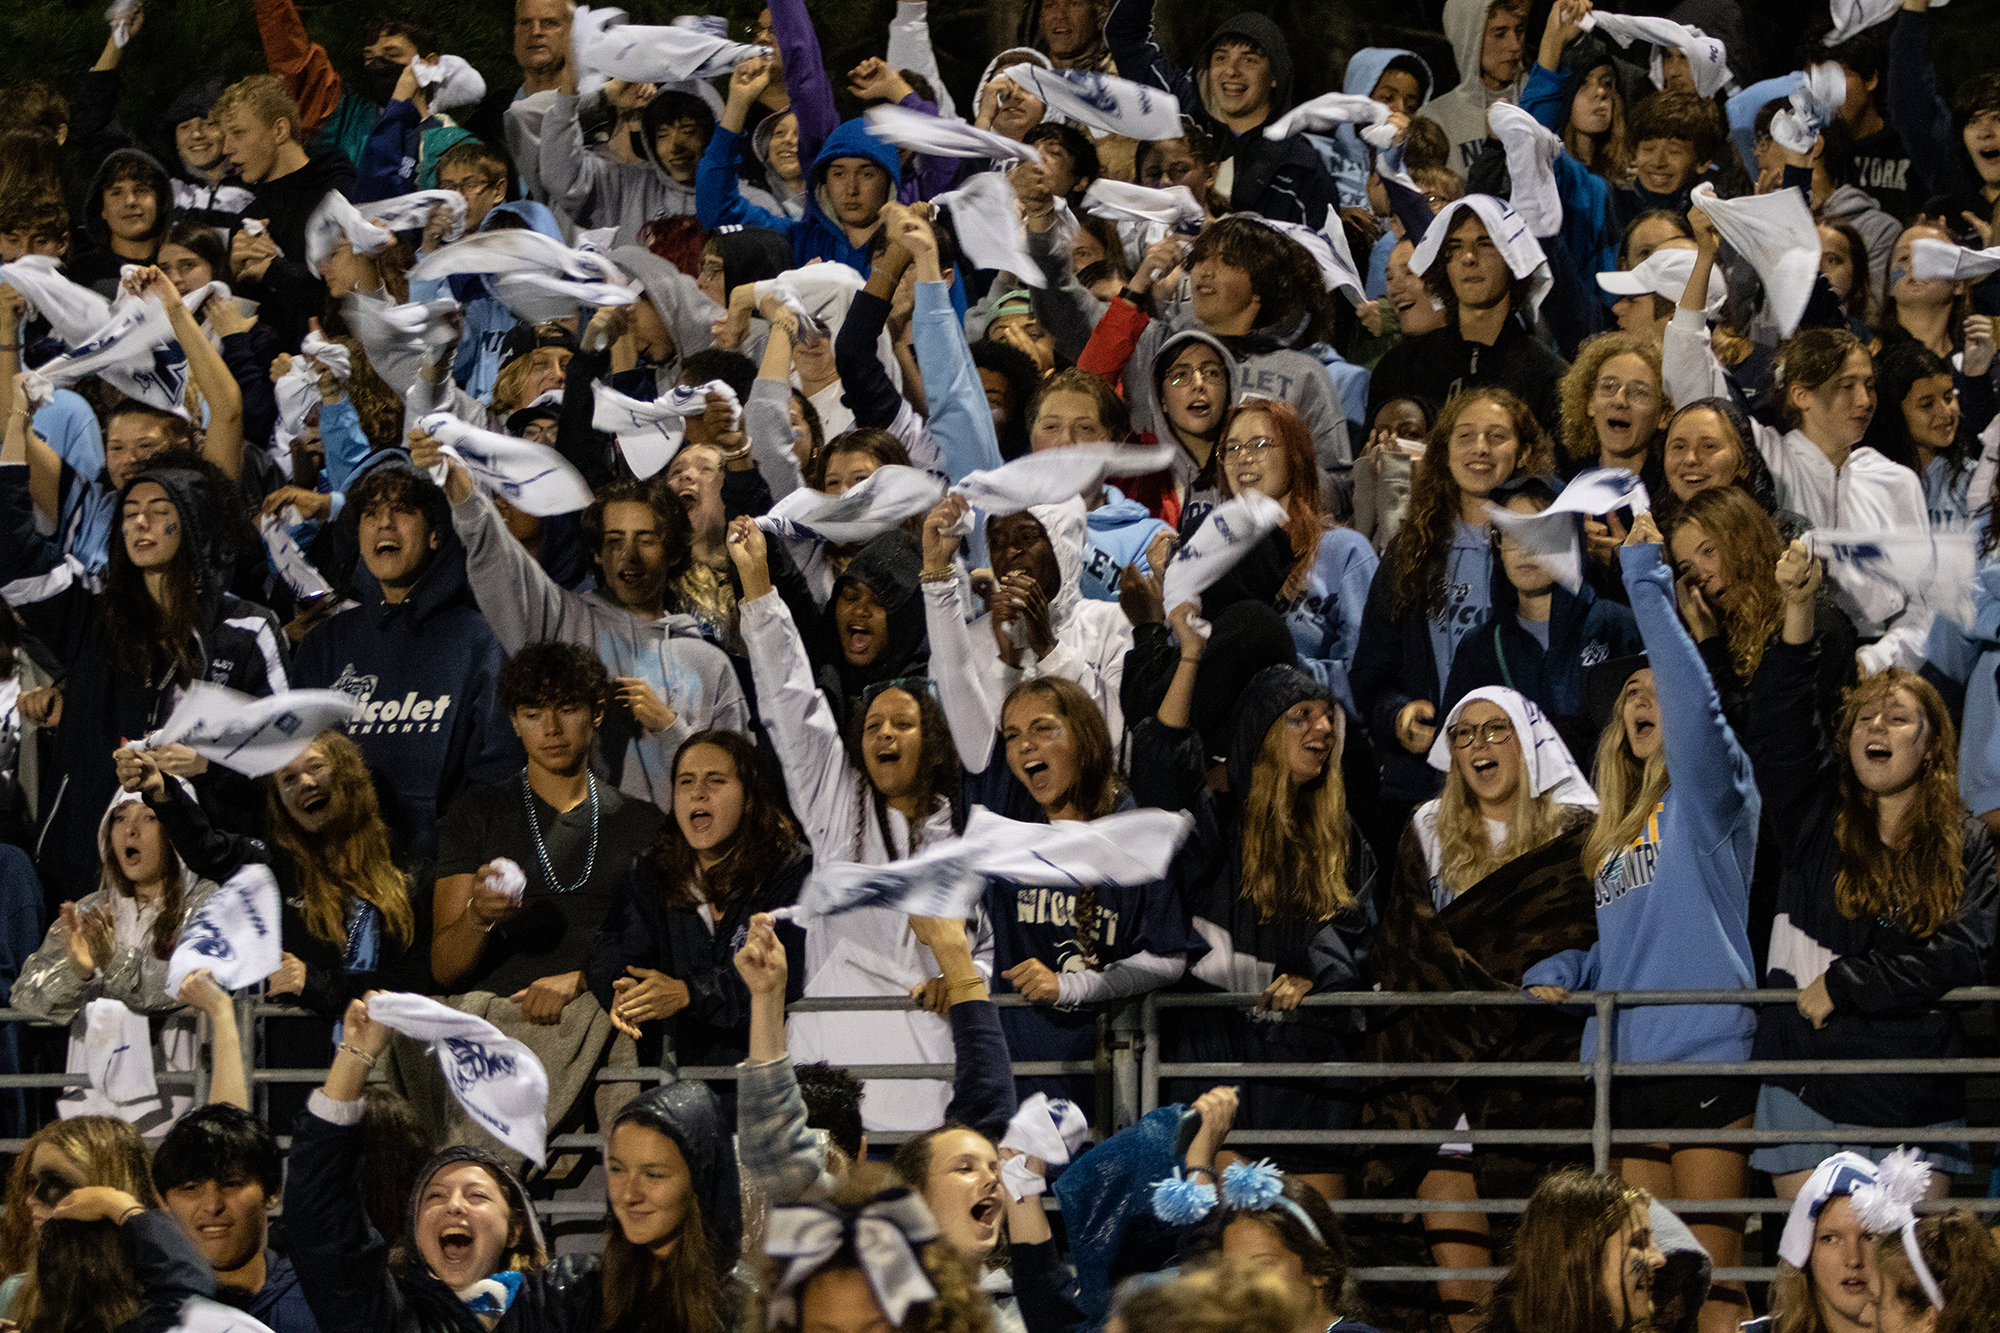 Nicolet student section